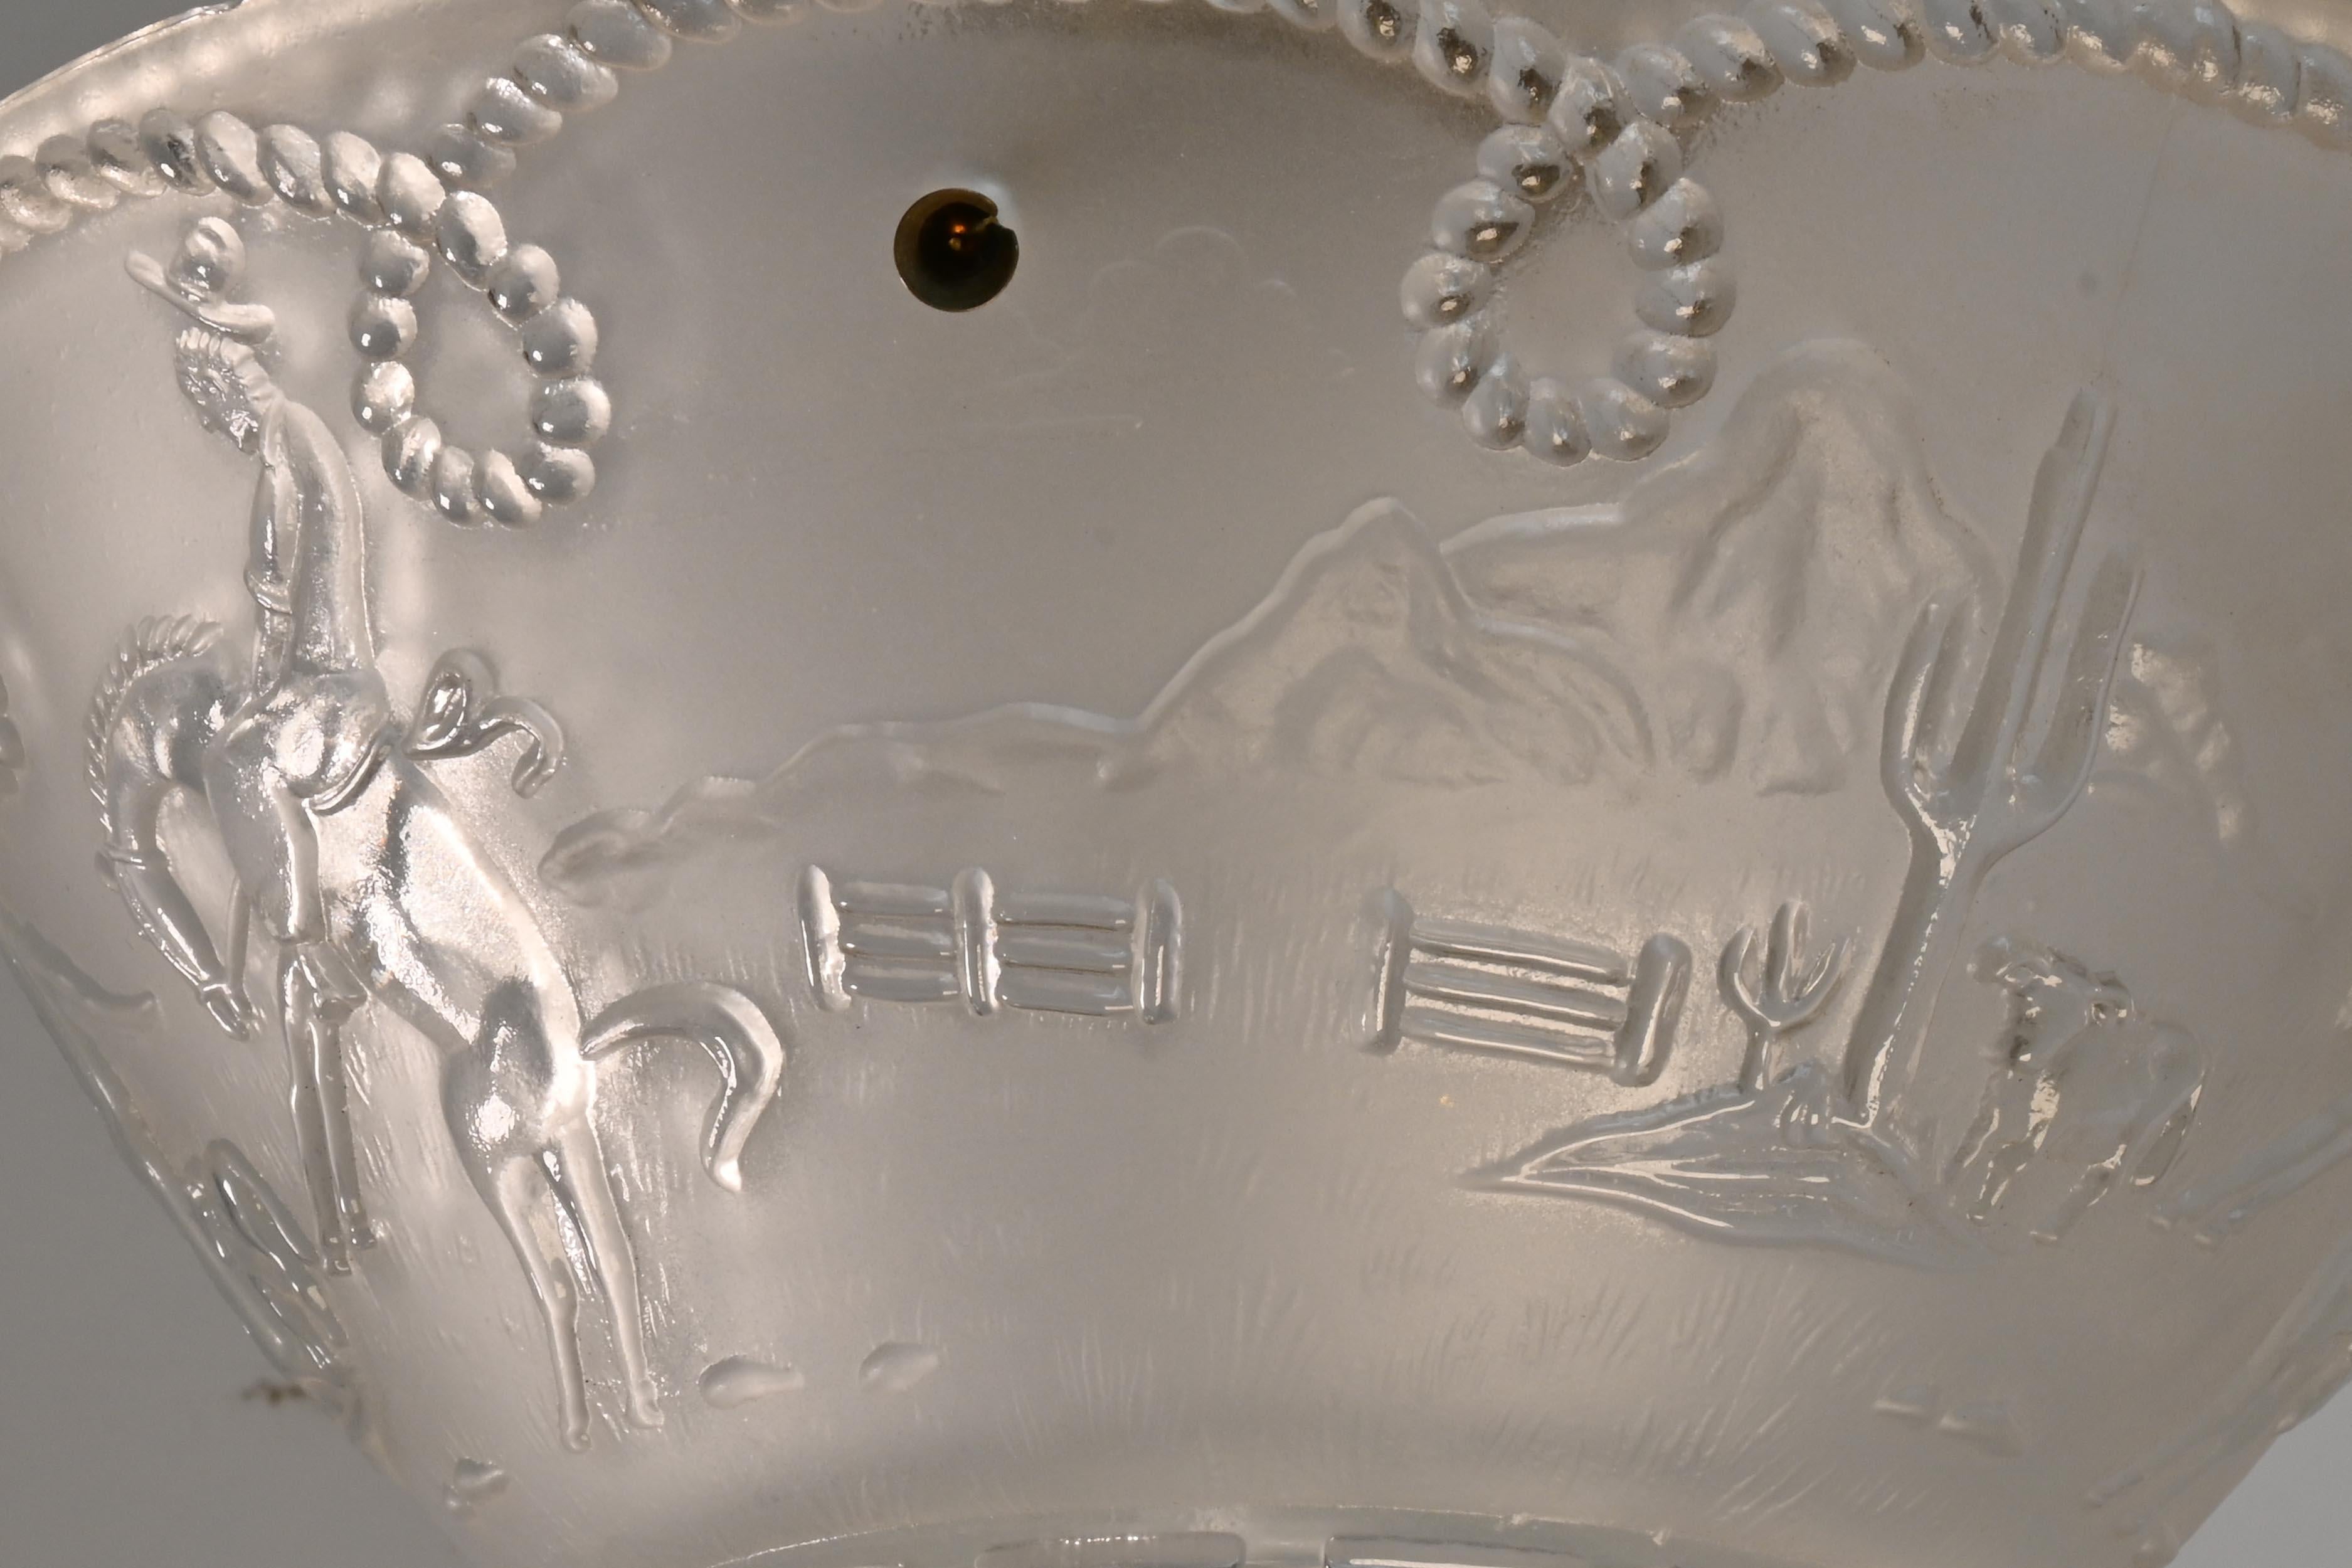 Western themed Bronco Riding Cowboy Molded Glass Flush Mount

Two Available / Priced Separately
AA# 61159

This low profile 3 chain flush mount with mold glass shade with bronco riding cowboy, range scene that includes cactus & cattle called